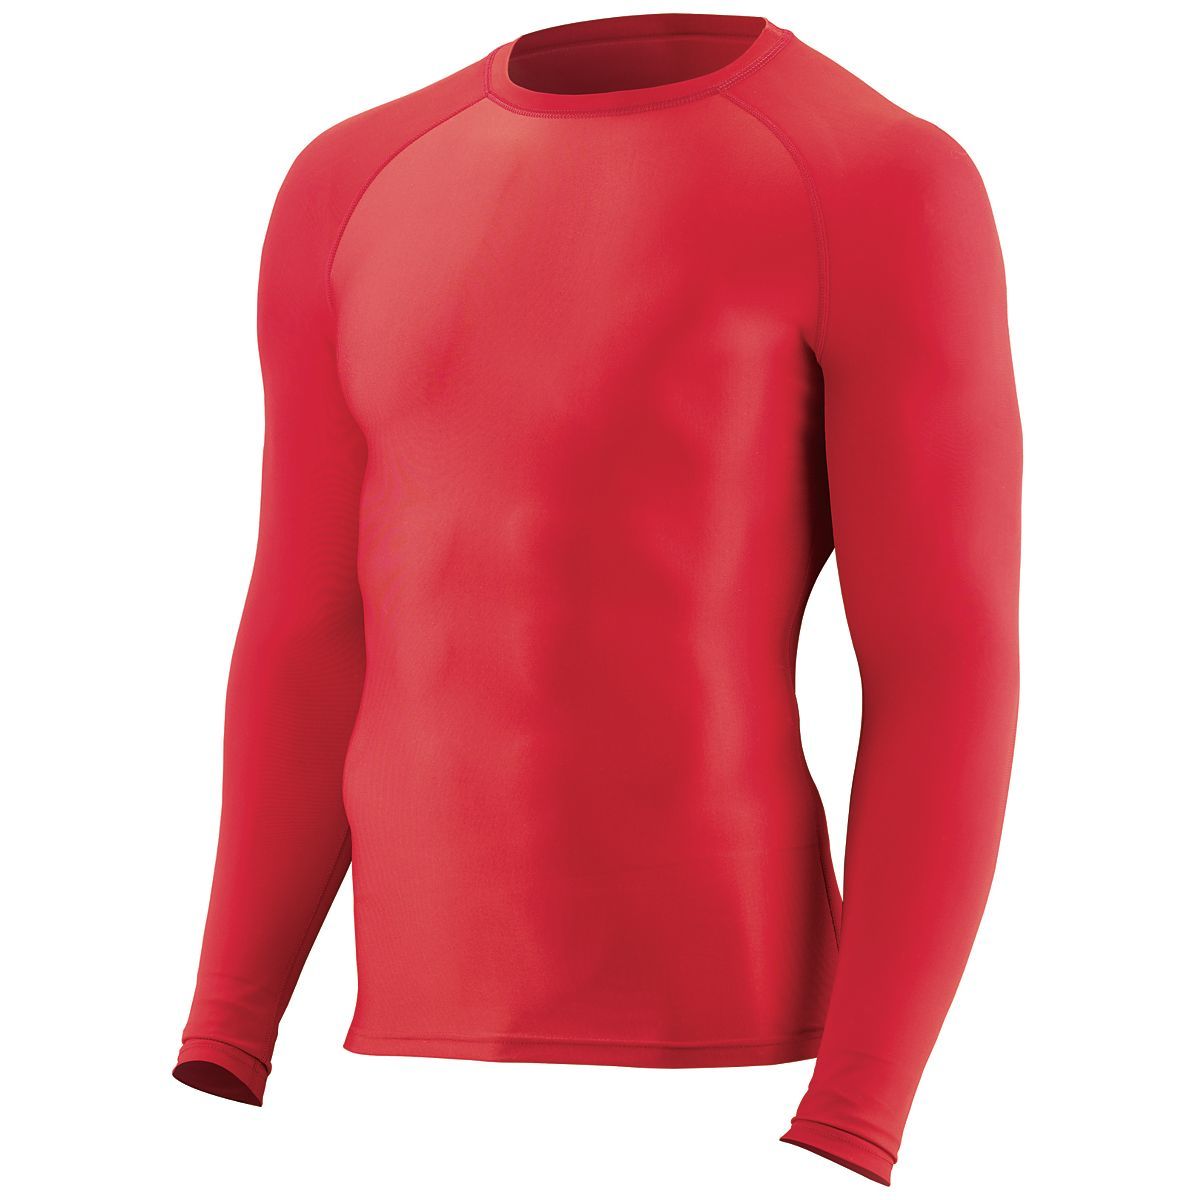 Hyperform Compression Long Sleeve Tee - 2604